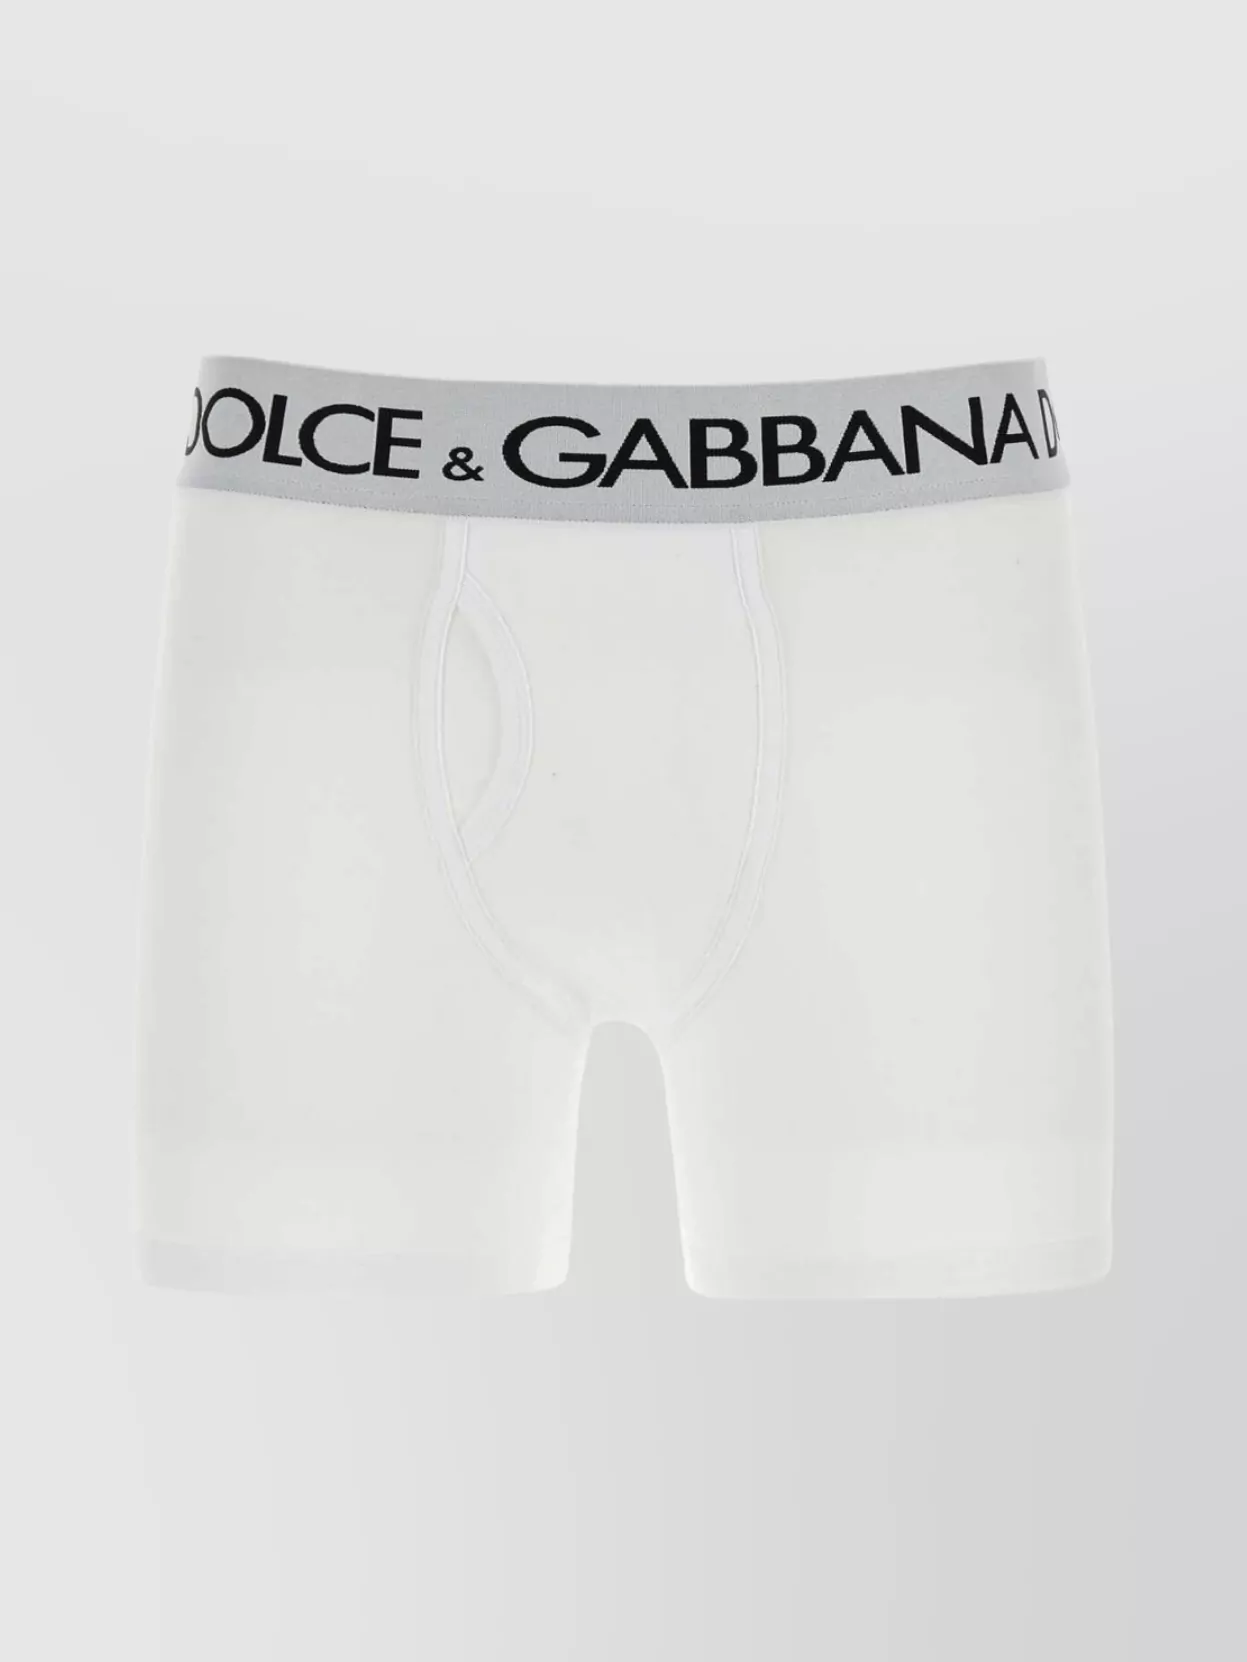 Shop Dolce & Gabbana Stretch Cotton Boxer With Elastic Waistband And Contrast Piping